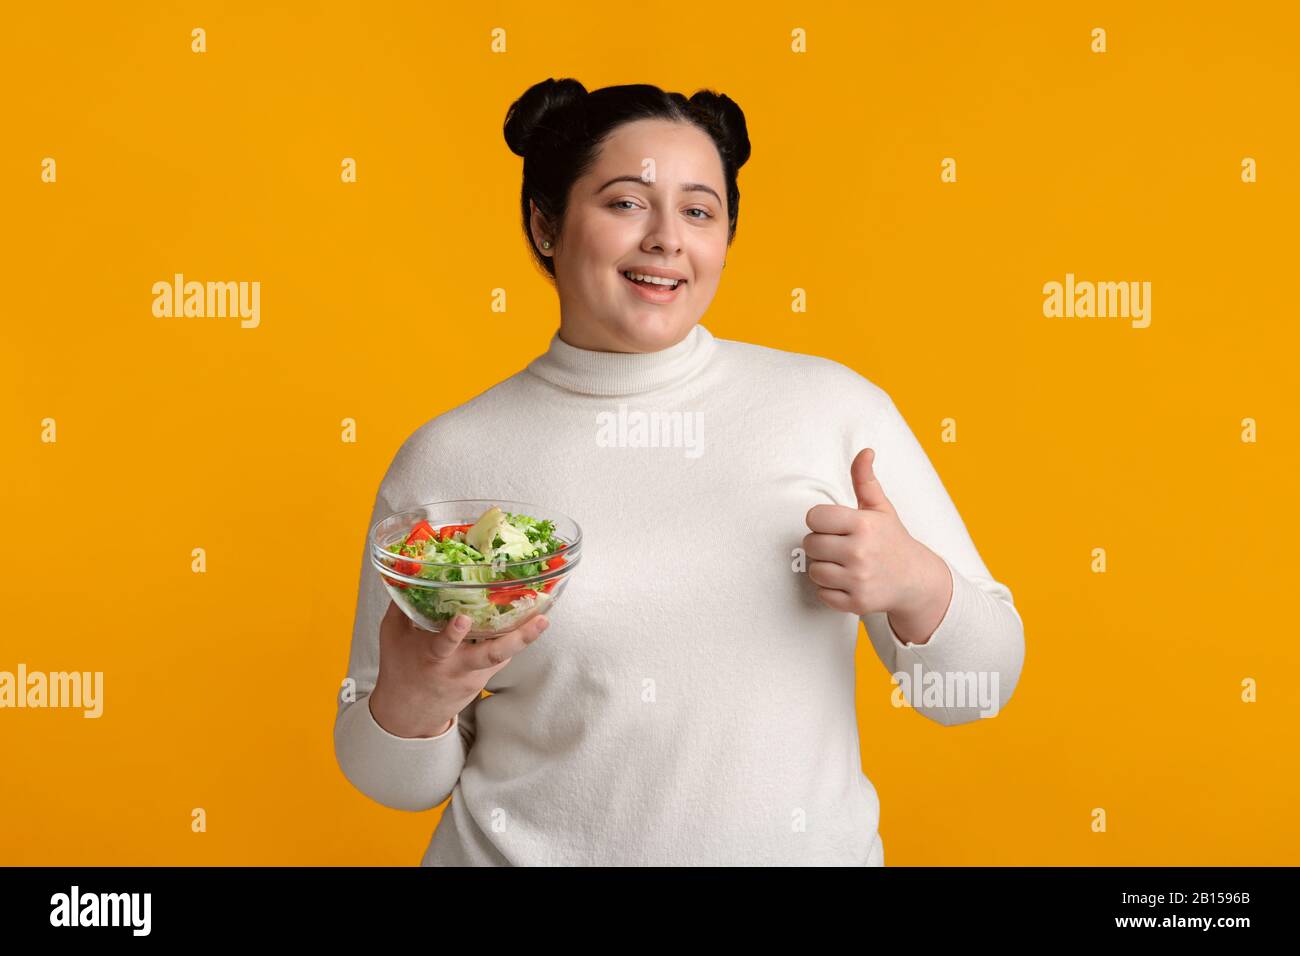 Overweight Woman Holding Bowl With Vegetable Salad And Showing Thumb Up Stock Photo